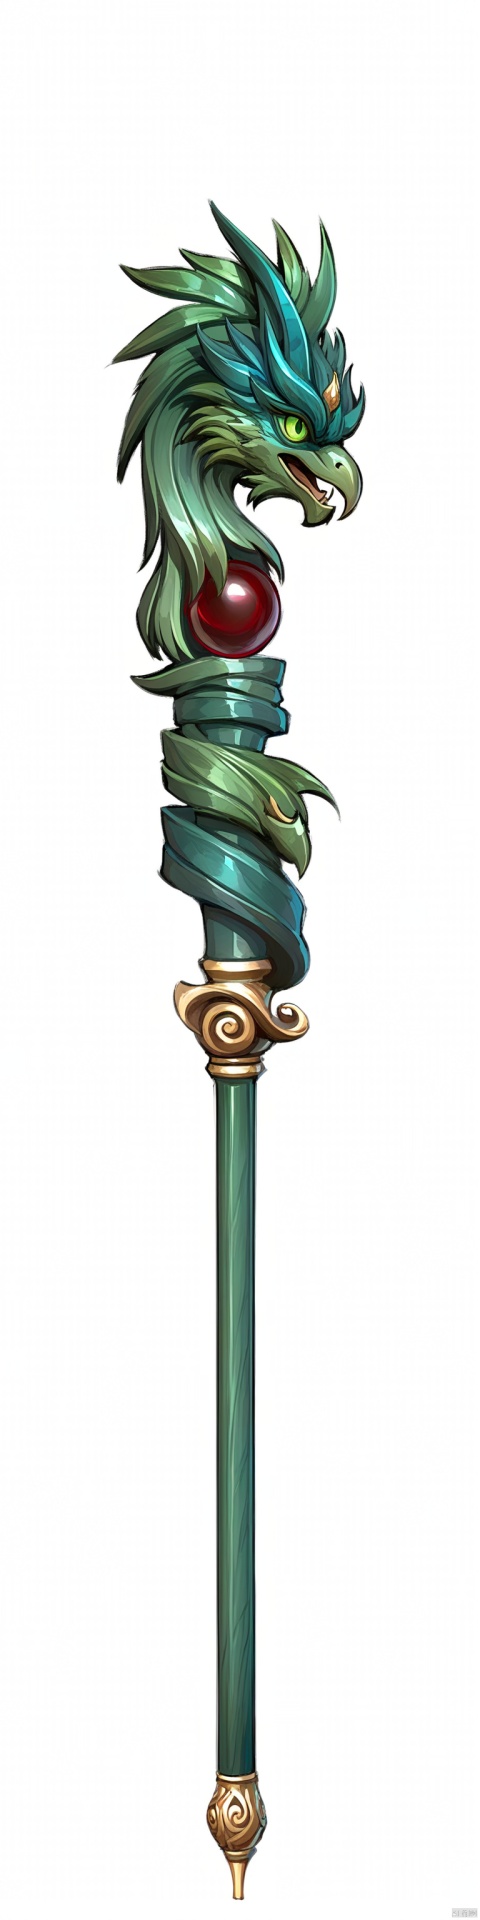  Wooden cane with phoenix elements, ancient vibe, mysterious and elegant design, made of oak and cherry wood, textured in shades of blue and green, with a blue and green phoenix head carving, an elegantly unfurling tail, and blue and green gemstone eyes, attention to detail.